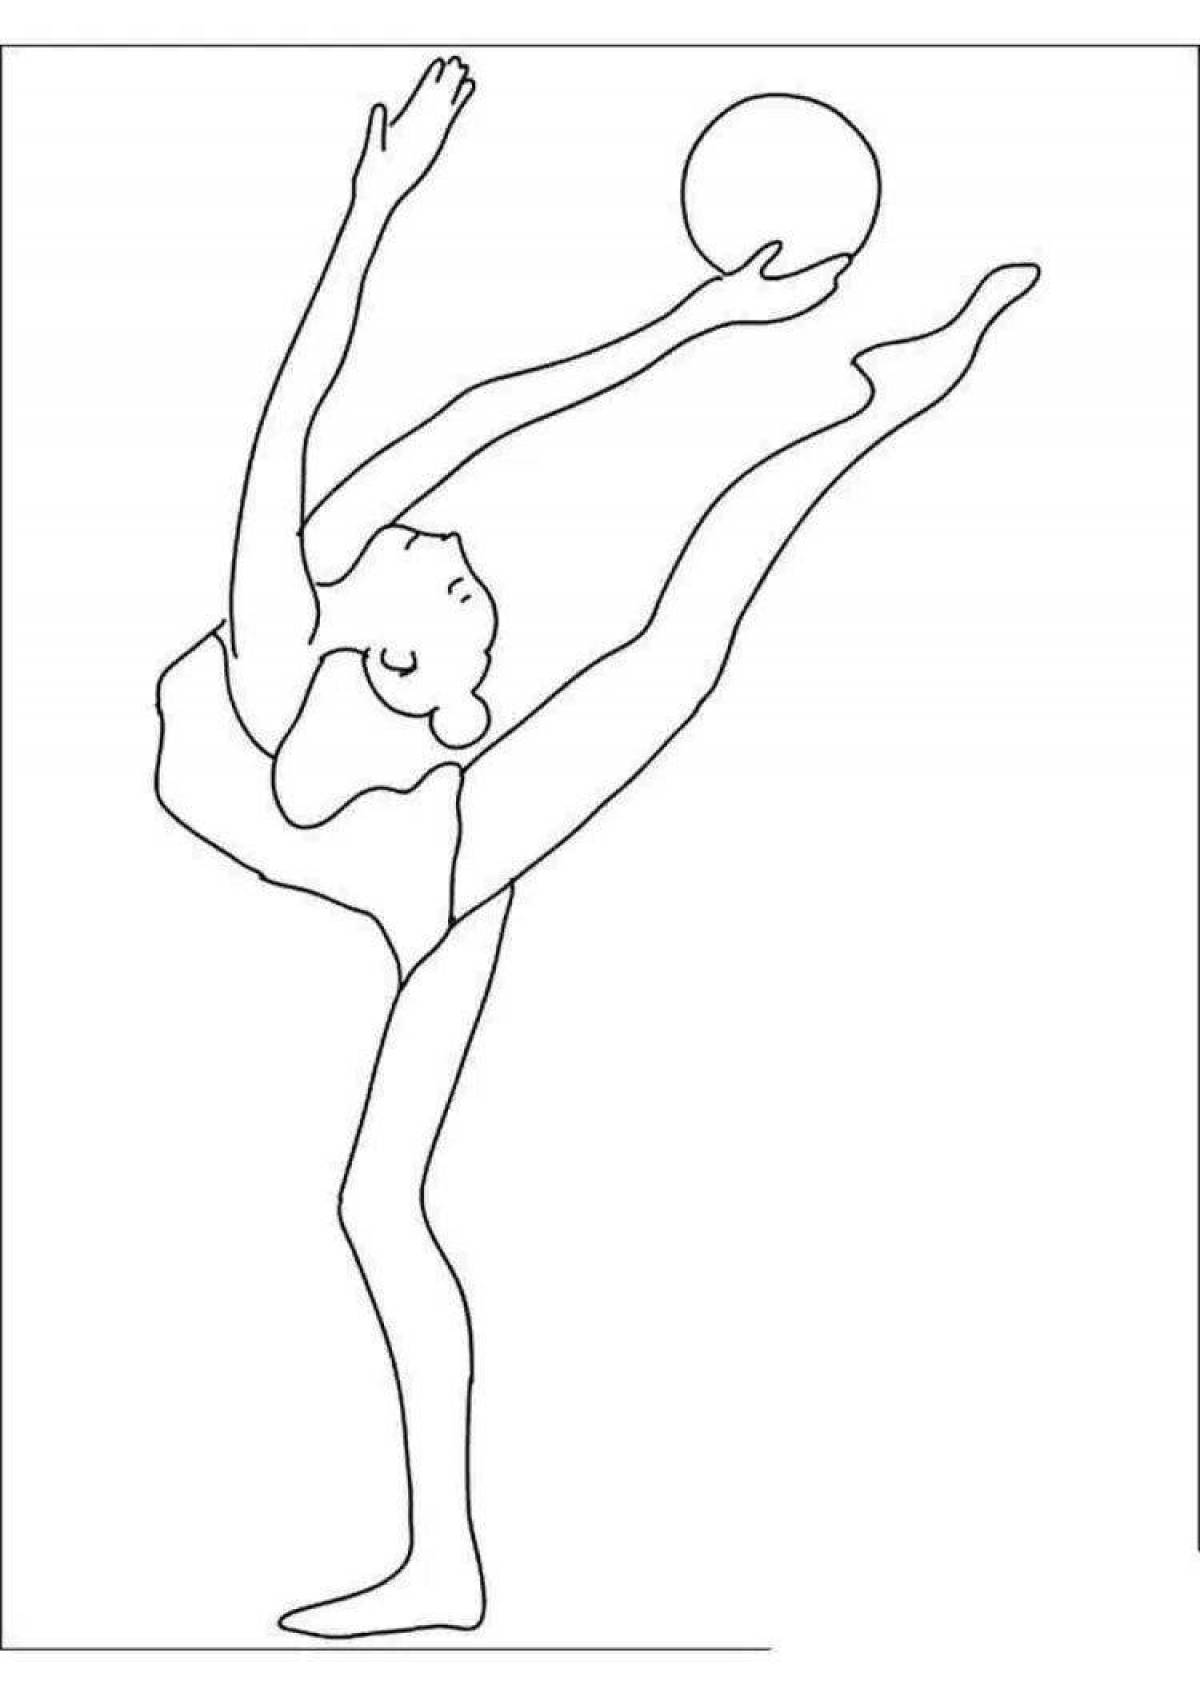 Colorful gymnast coloring page